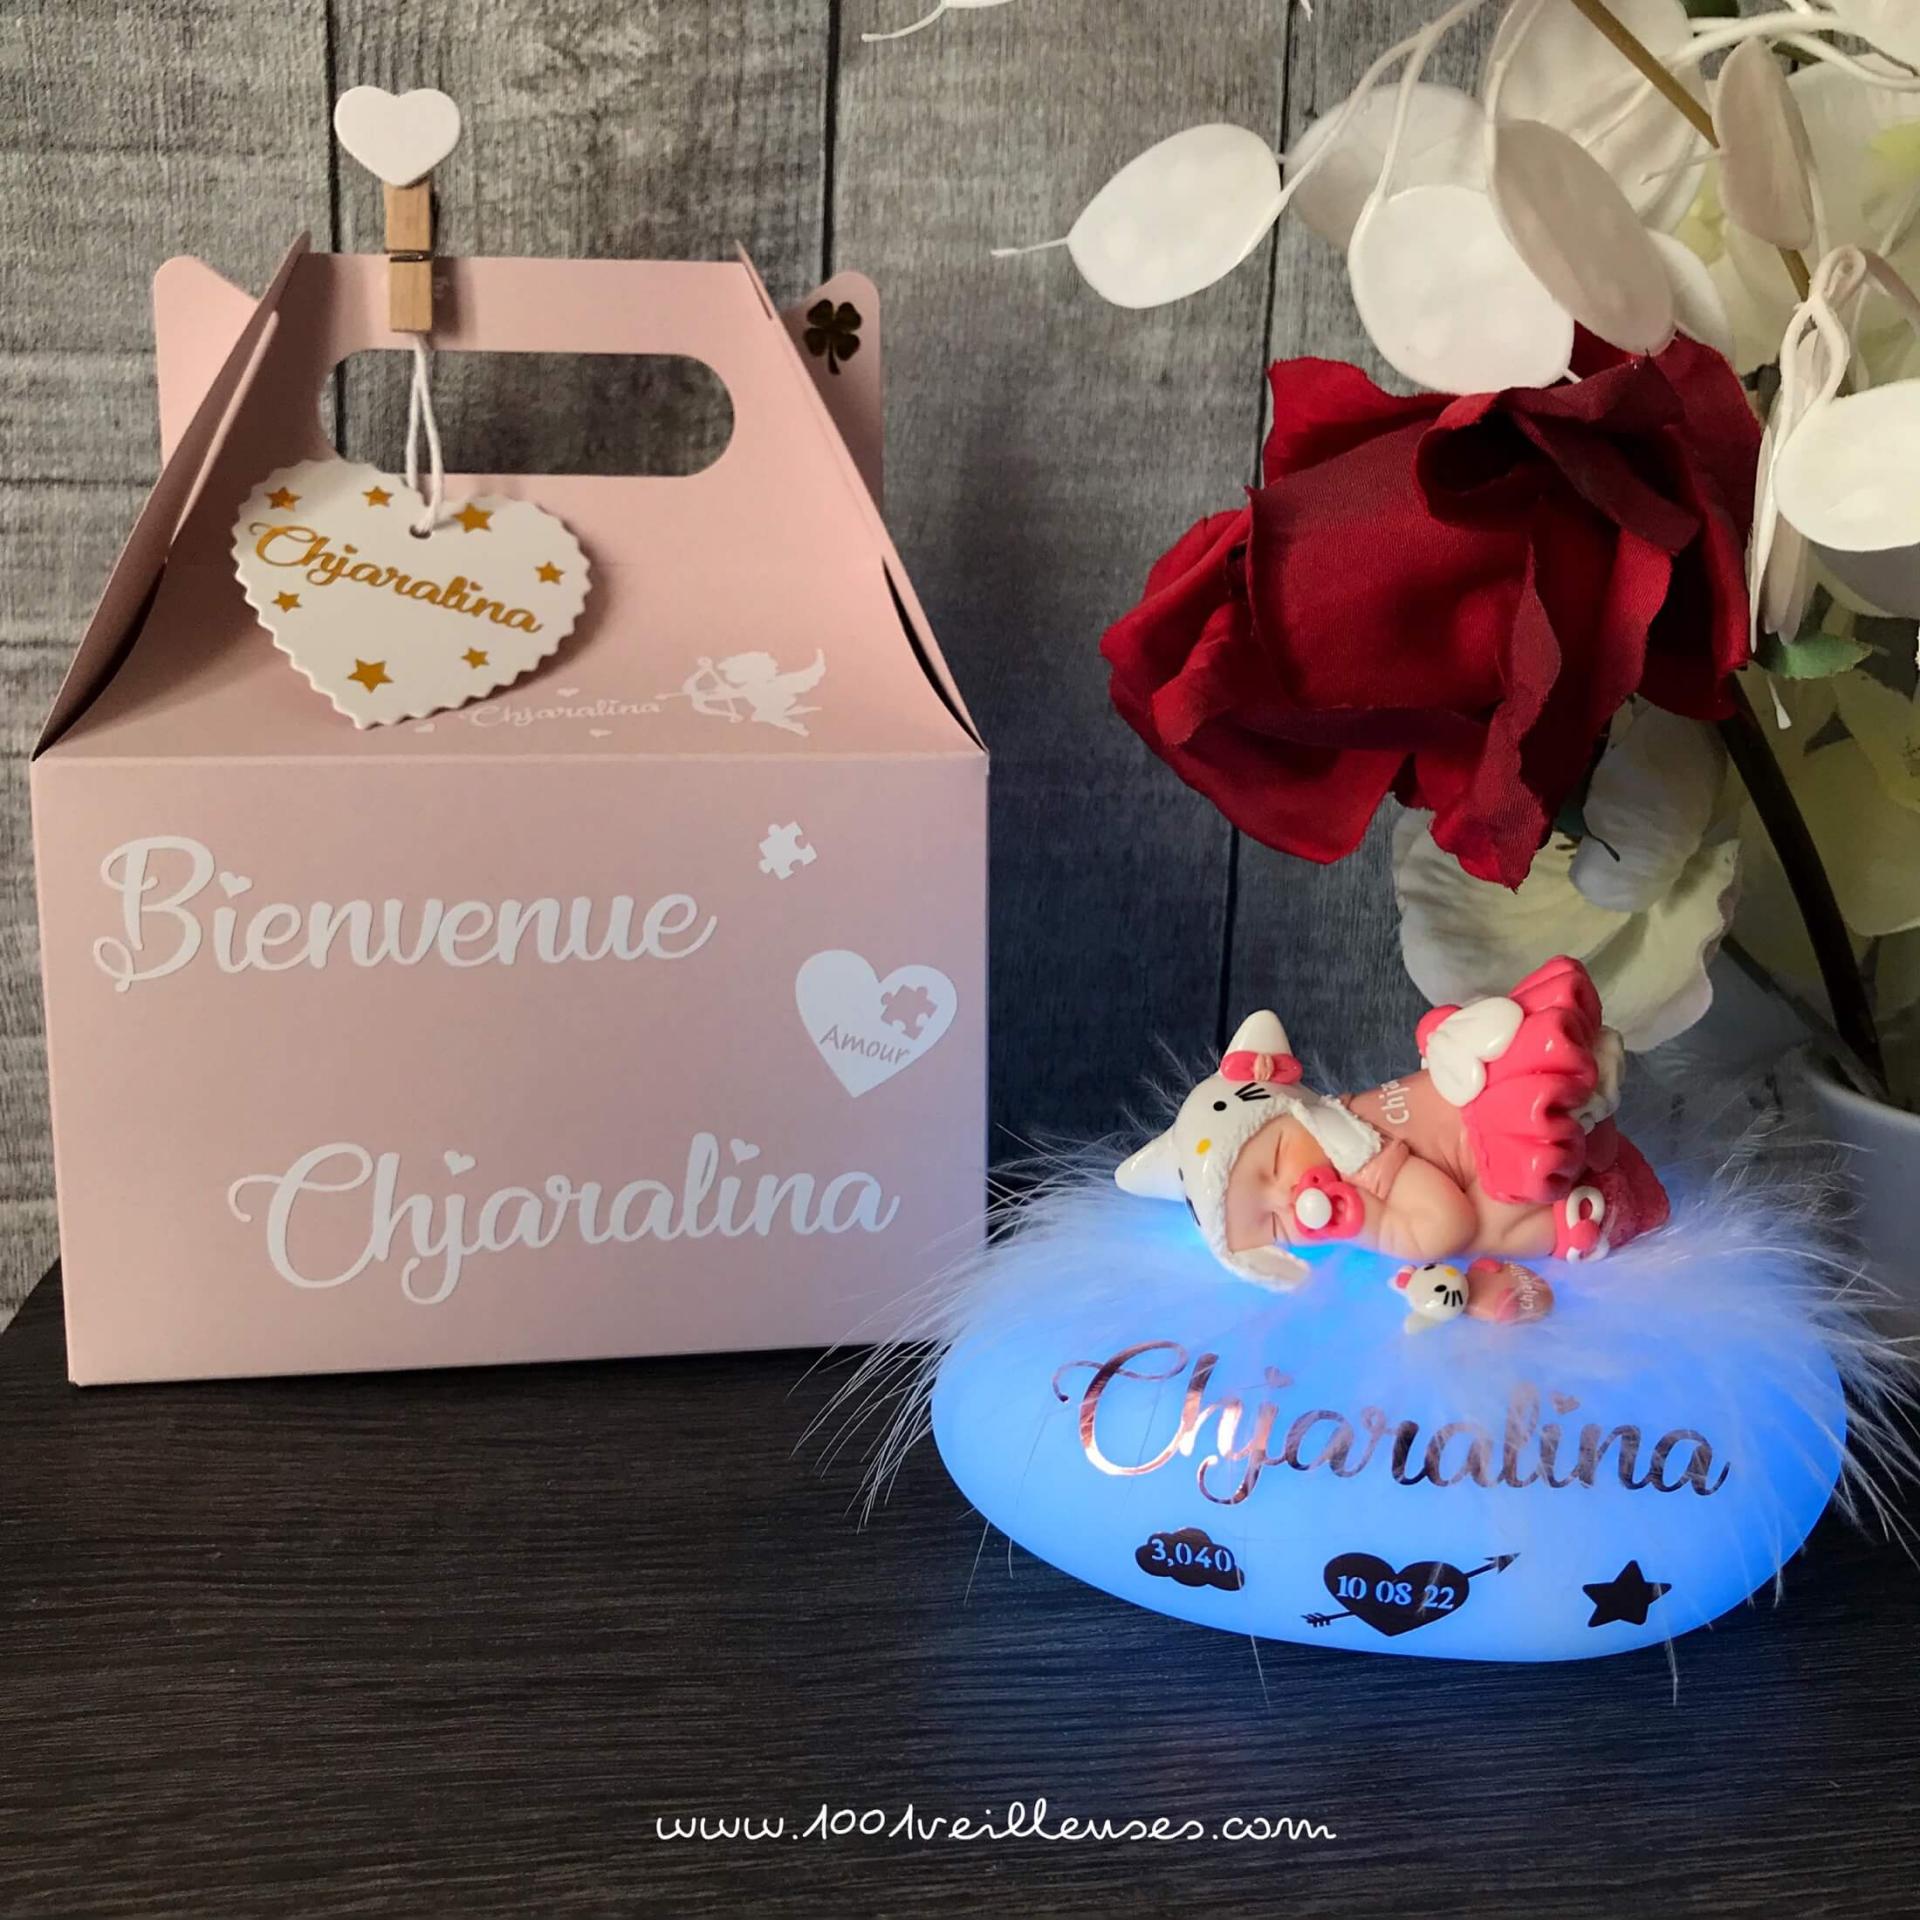 Personalized night light in the shape of a luminous pebble with a baby dressed as Hello Kitty, complete with a gift box, ideal as a newborn gift with the name